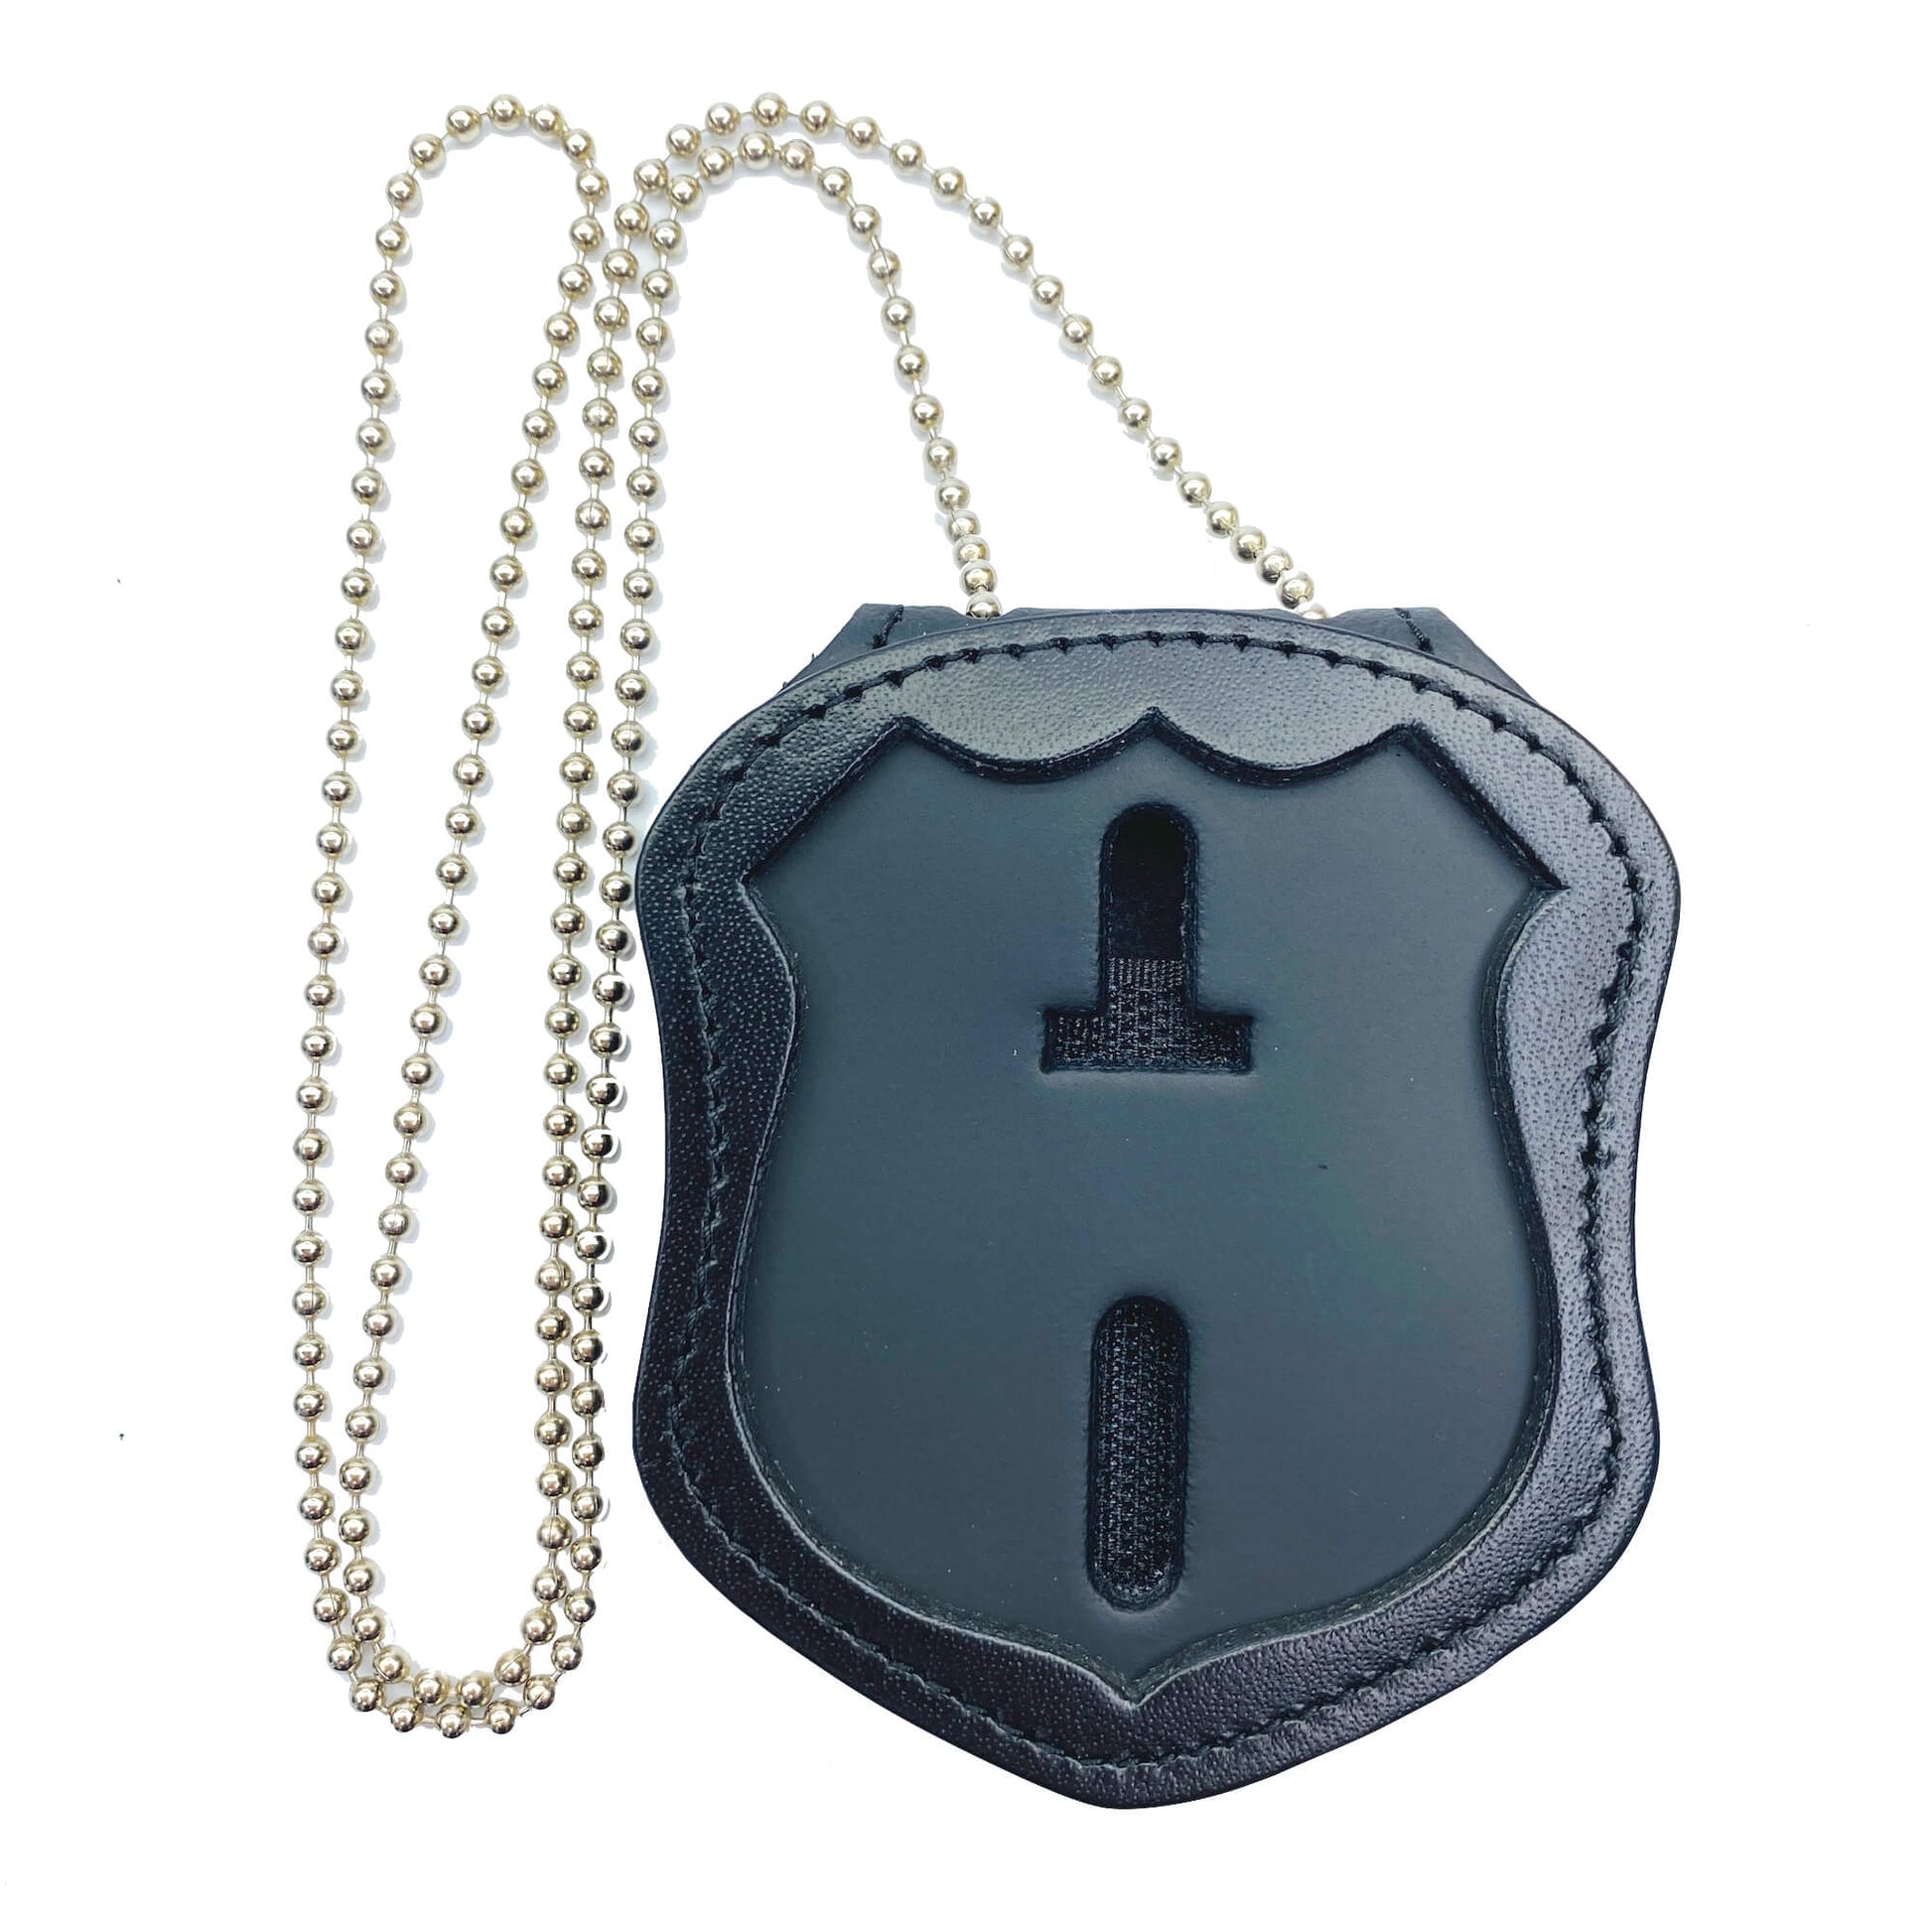 Custom Perfect Fit Cut Police Officer Badge Belt Holder & Neck Chain-Perfect Fit-911 Duty Gear USA